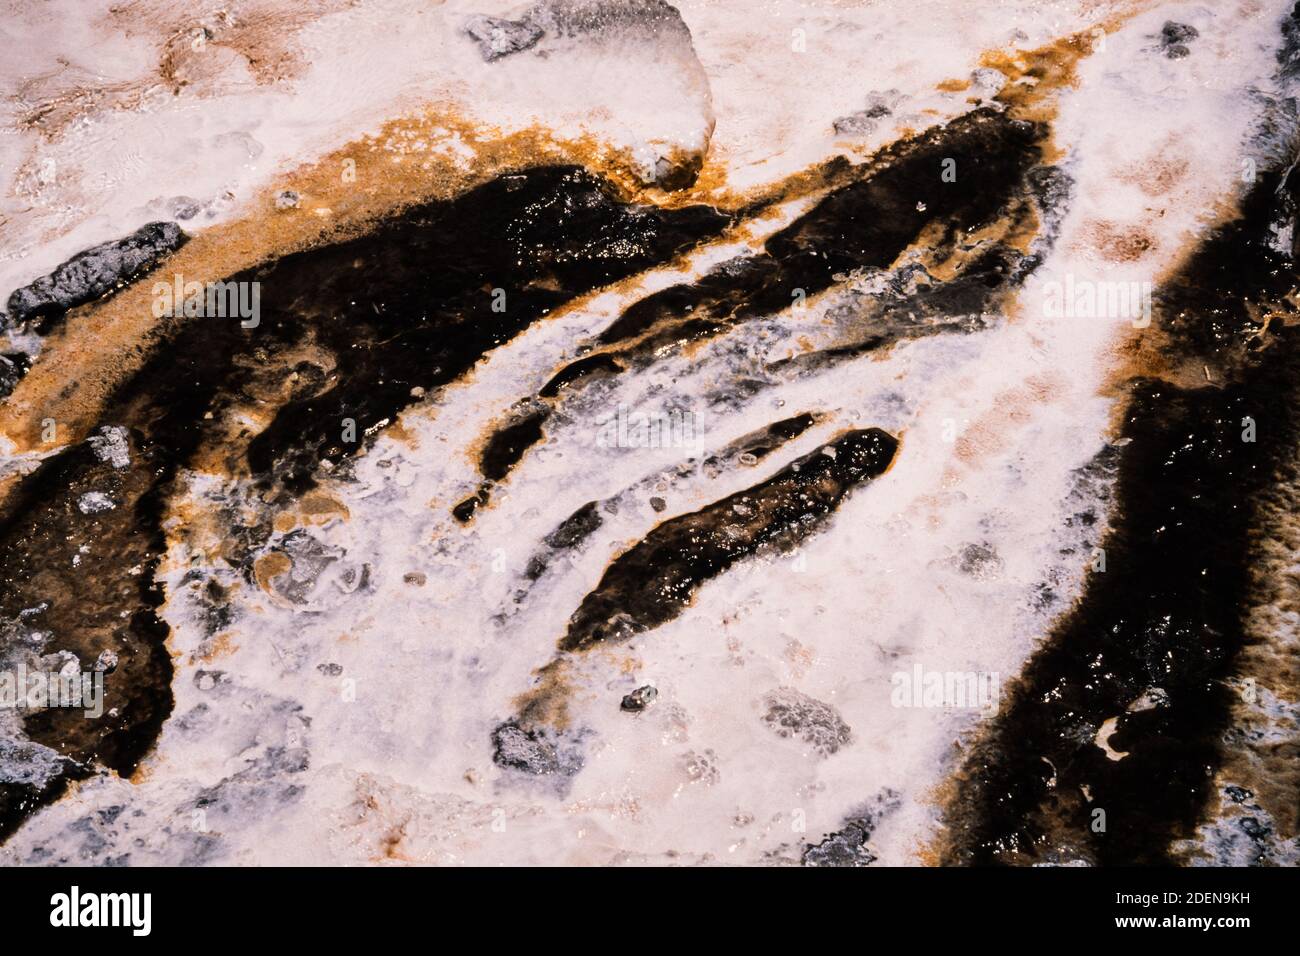 Colorful microbial mats made by thermophilic microbes in runoff water of a thermal feature in Yellowstone National Park in Wyoming, USA. Stock Photo